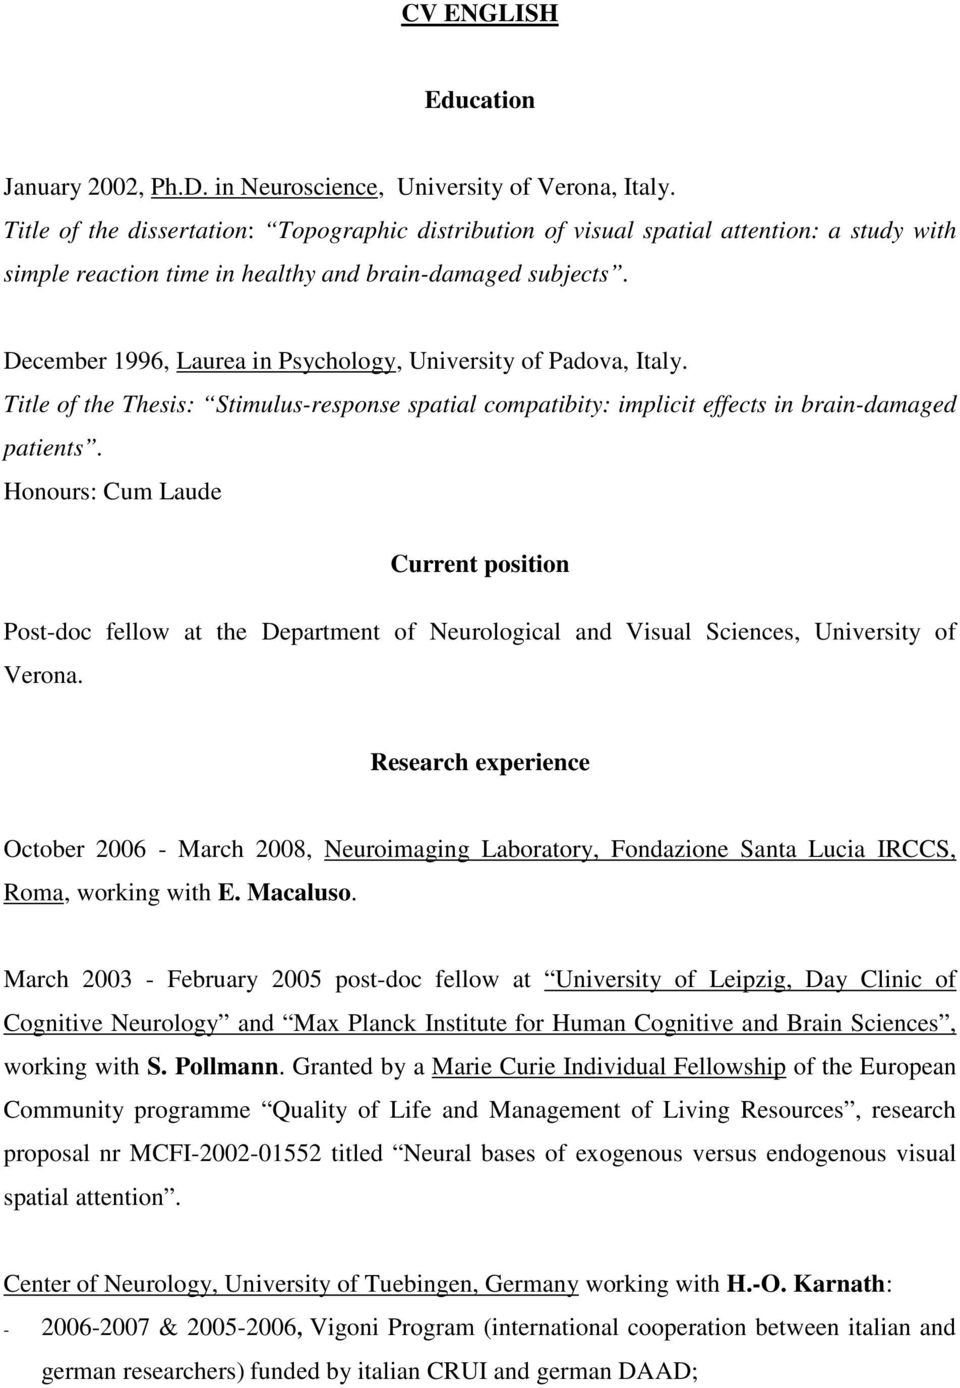 December 1996, Laurea in Psychology, University of Padova, Italy. Title of the Thesis: Stimulus-response spatial compatibity: implicit effects in brain-damaged patients.